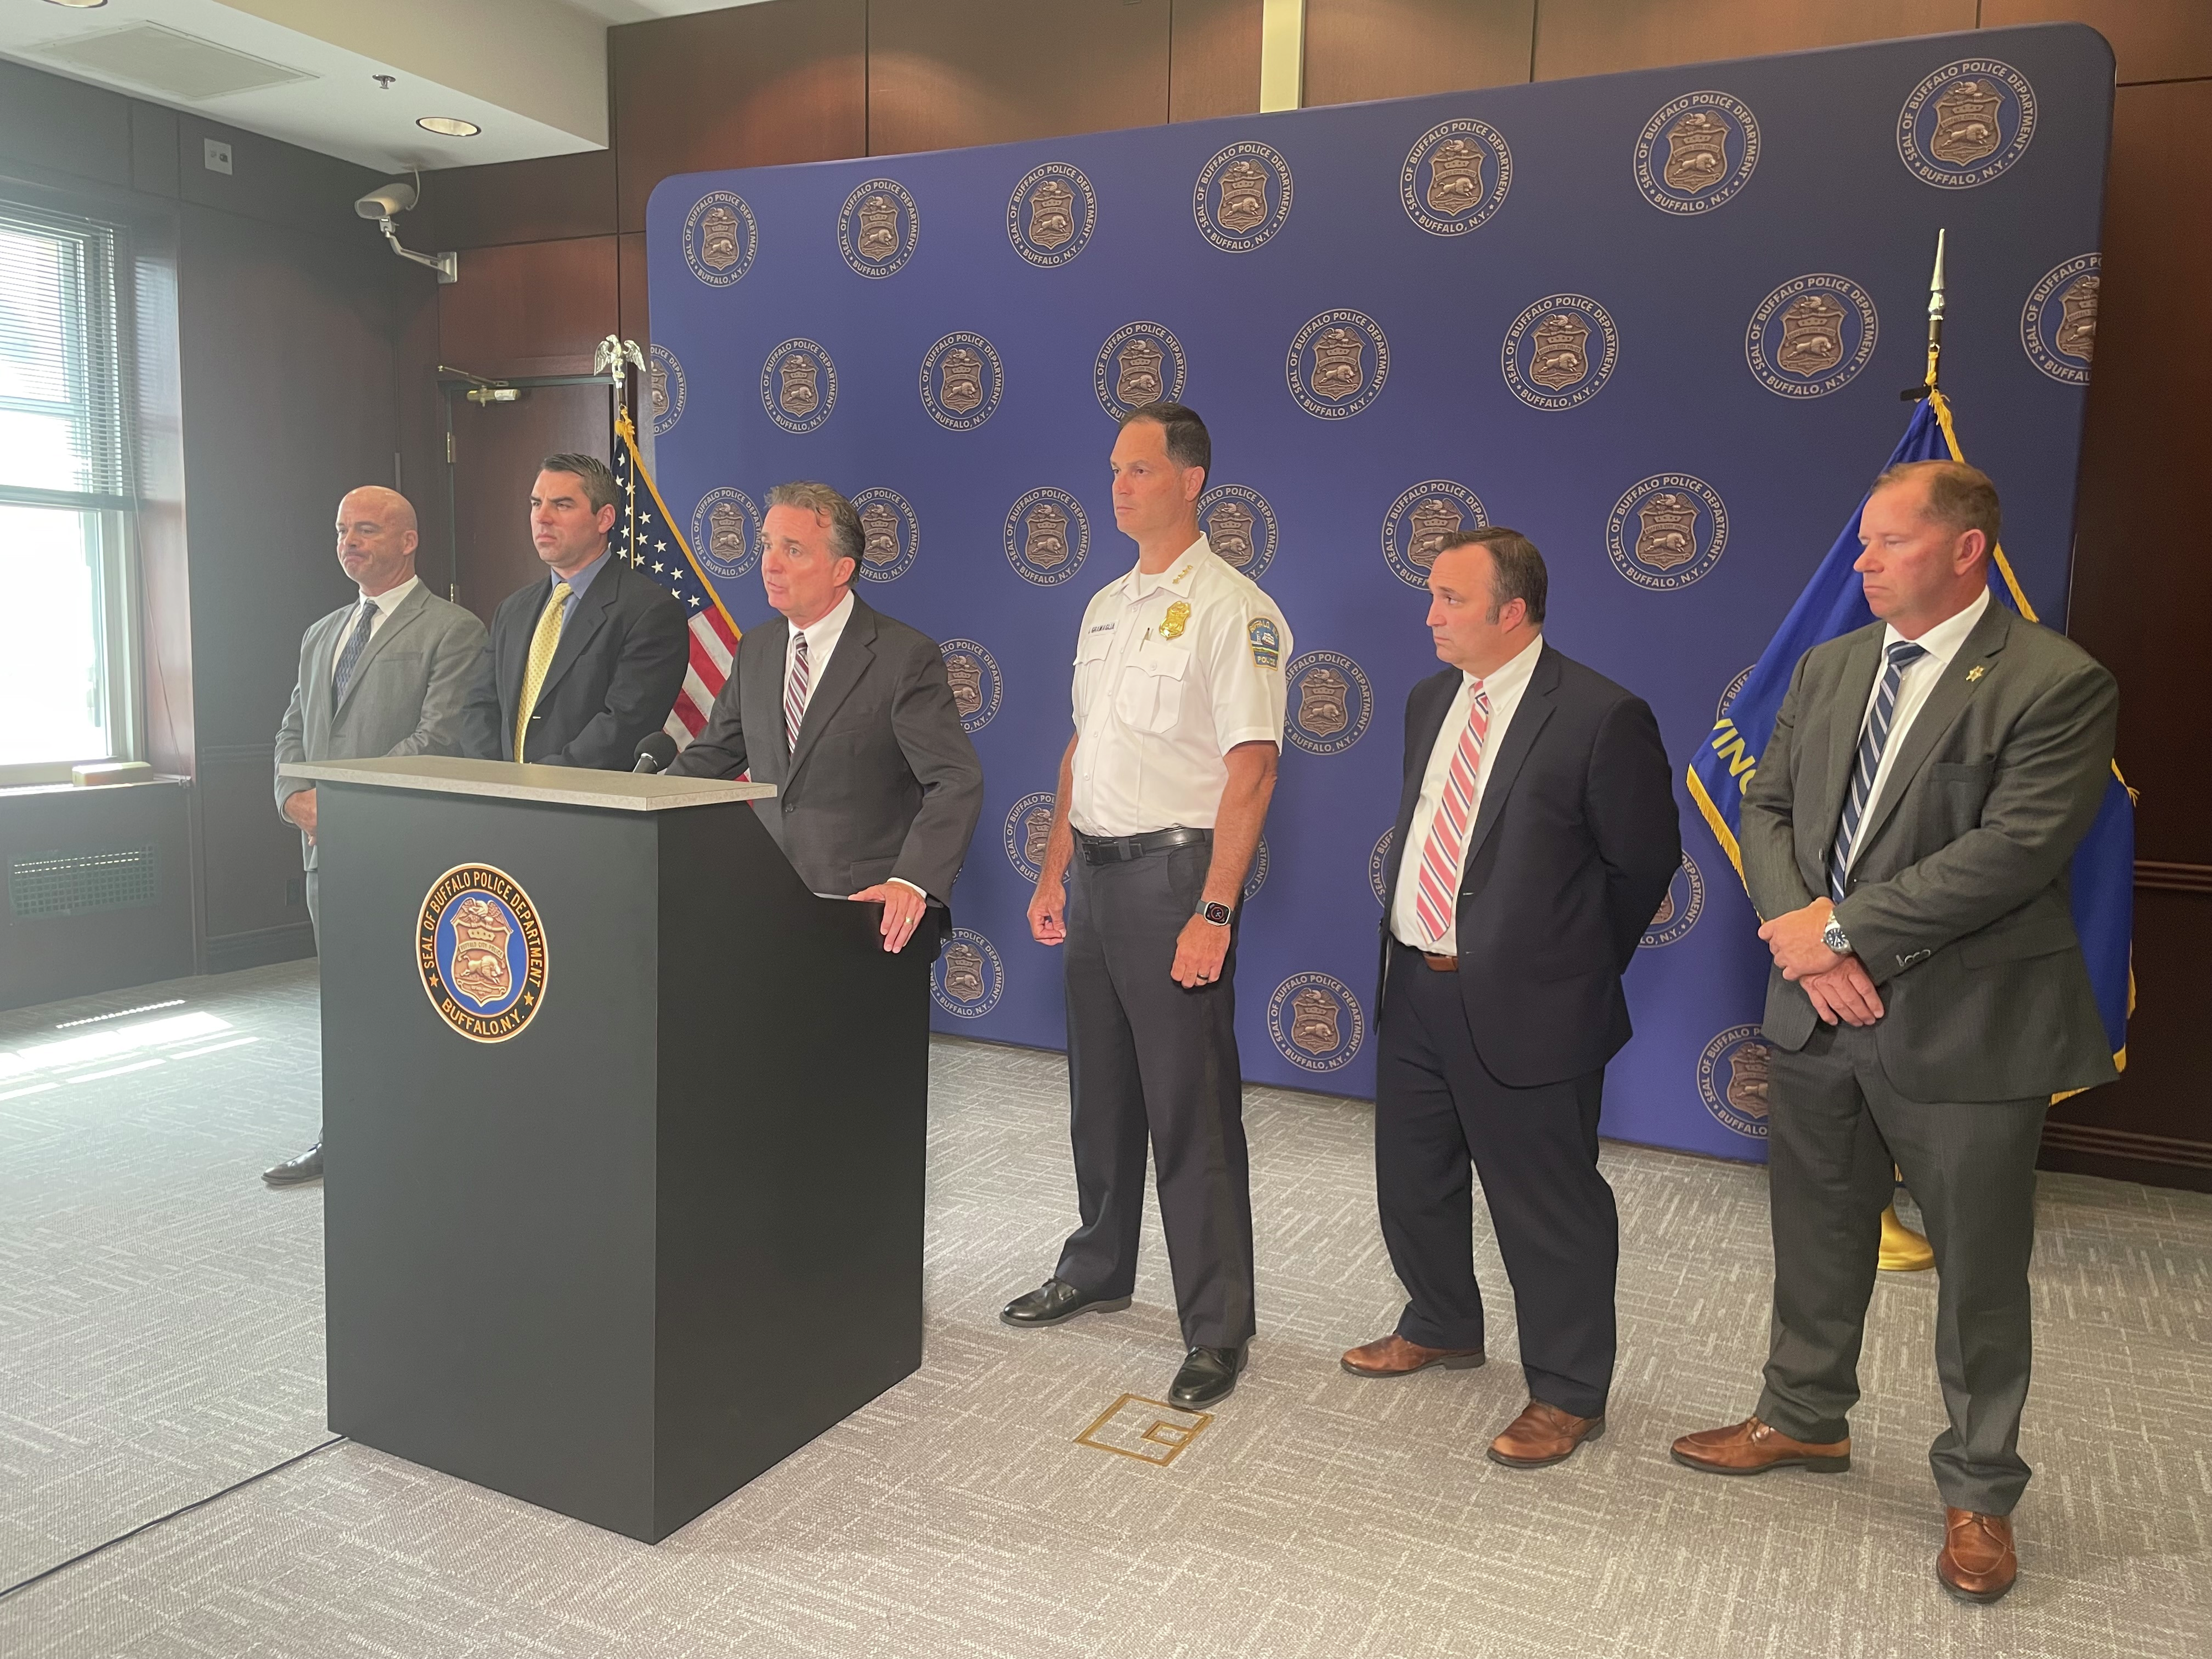 Buffalo Police, Erie County Sheriff's Office and the Erie County District Attorney's Office announce the arrest of an Assistant District Attorney for official misconduct